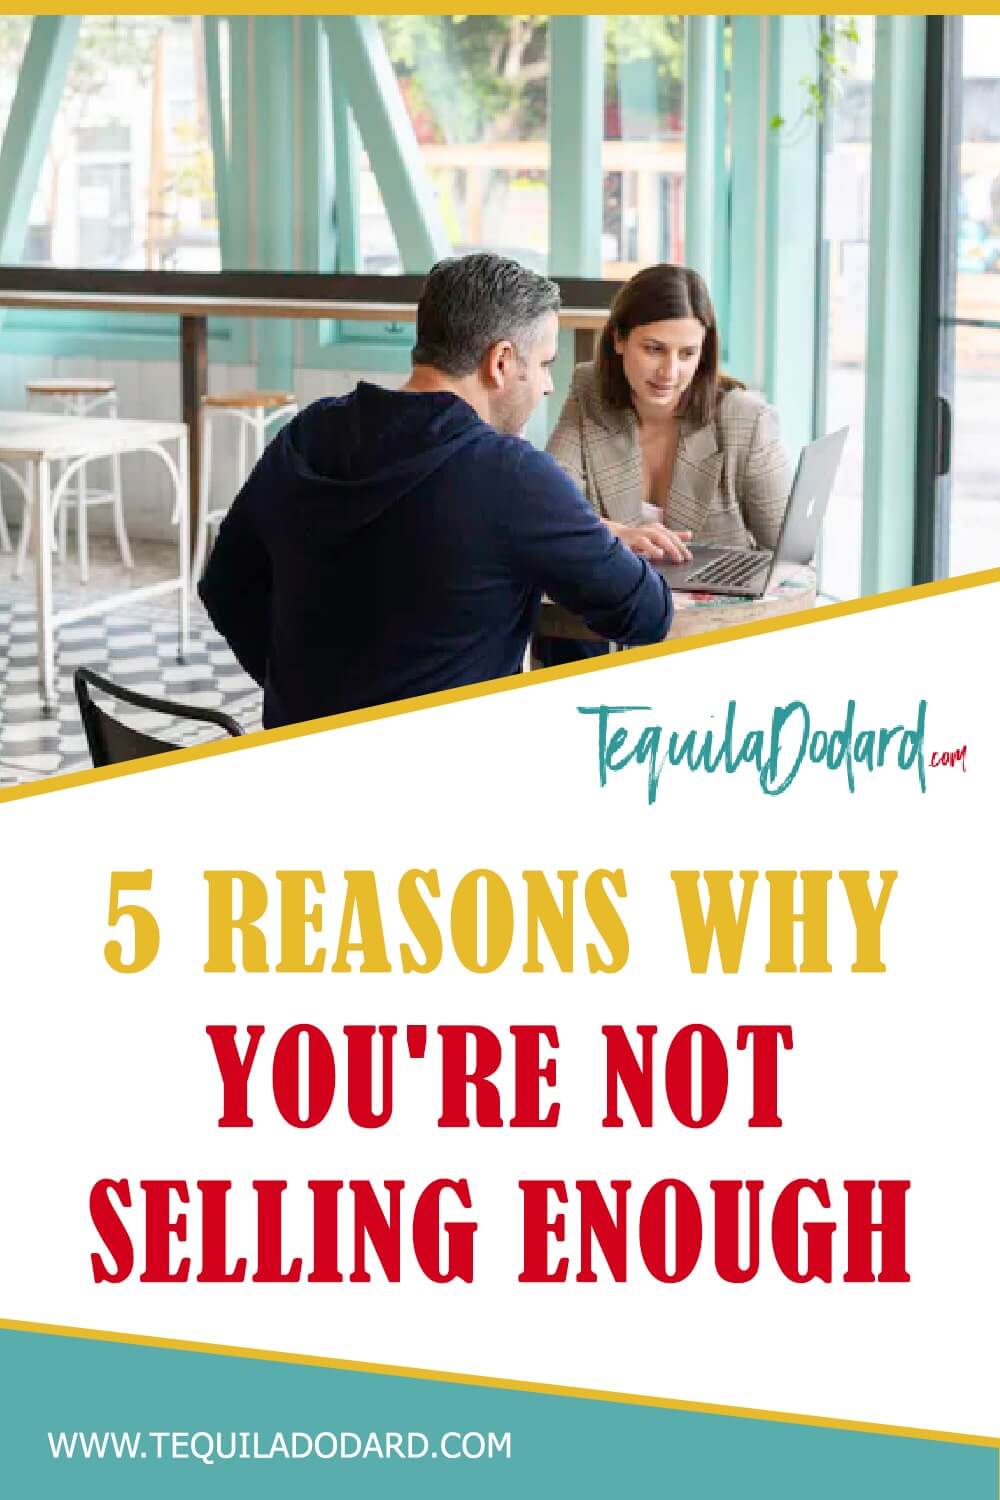 5-Reasons-Why-You-are-Not-Selling-Enough